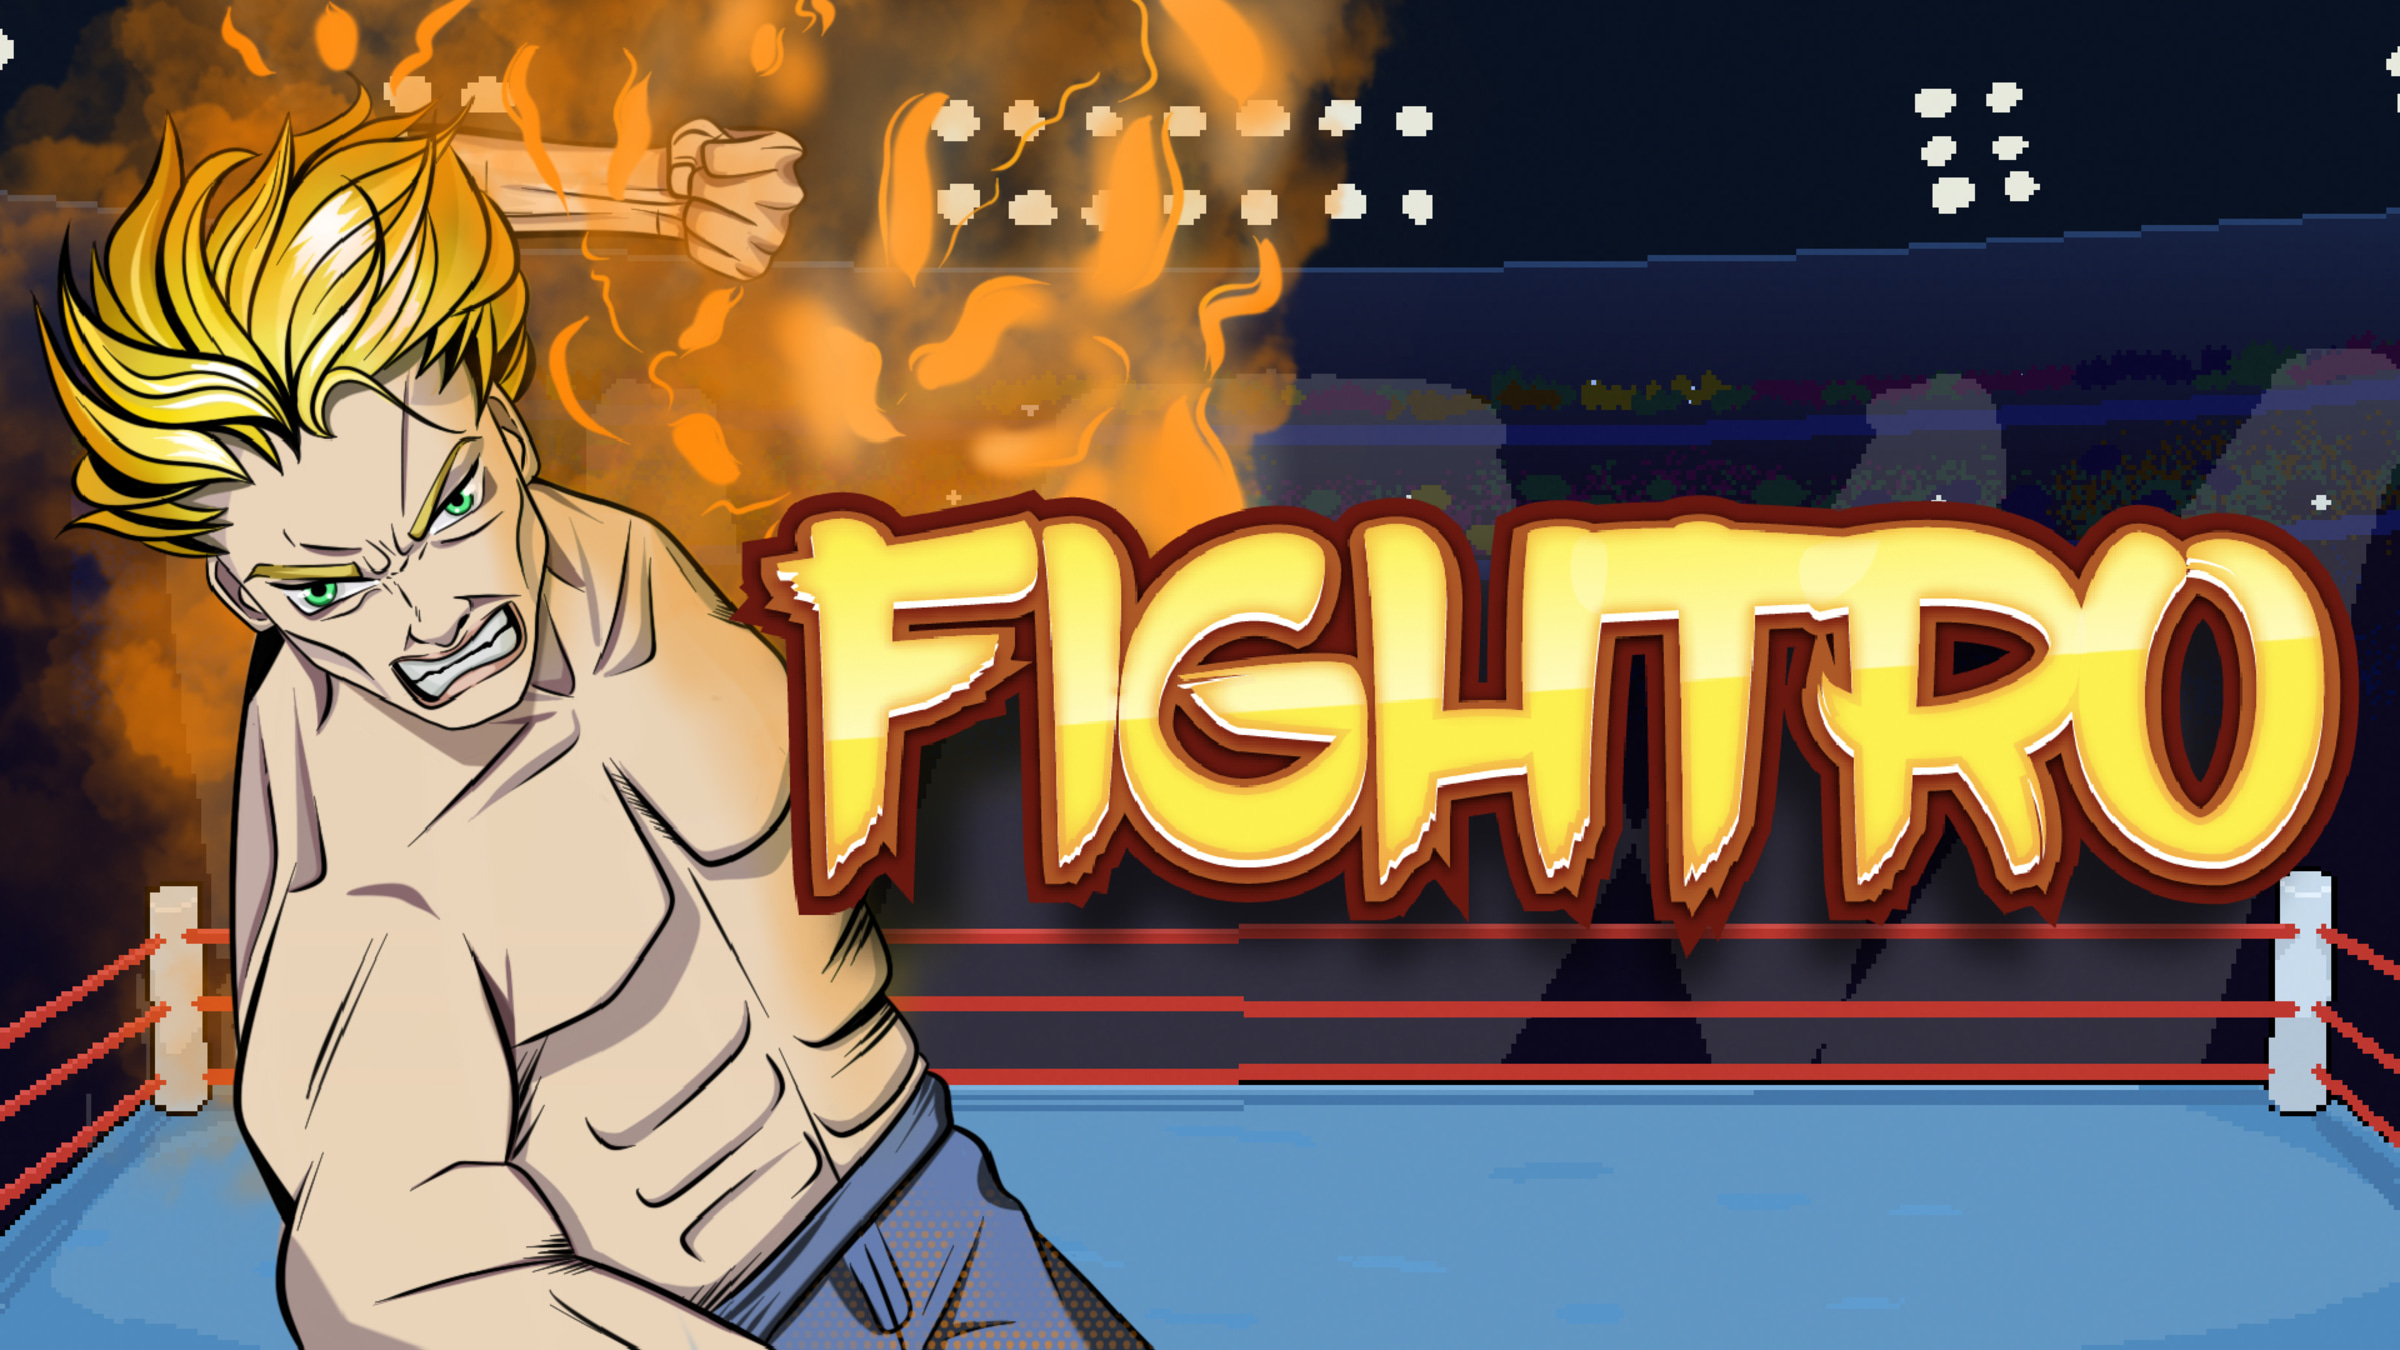 Anime Fighters CR - Play Online on Snokido